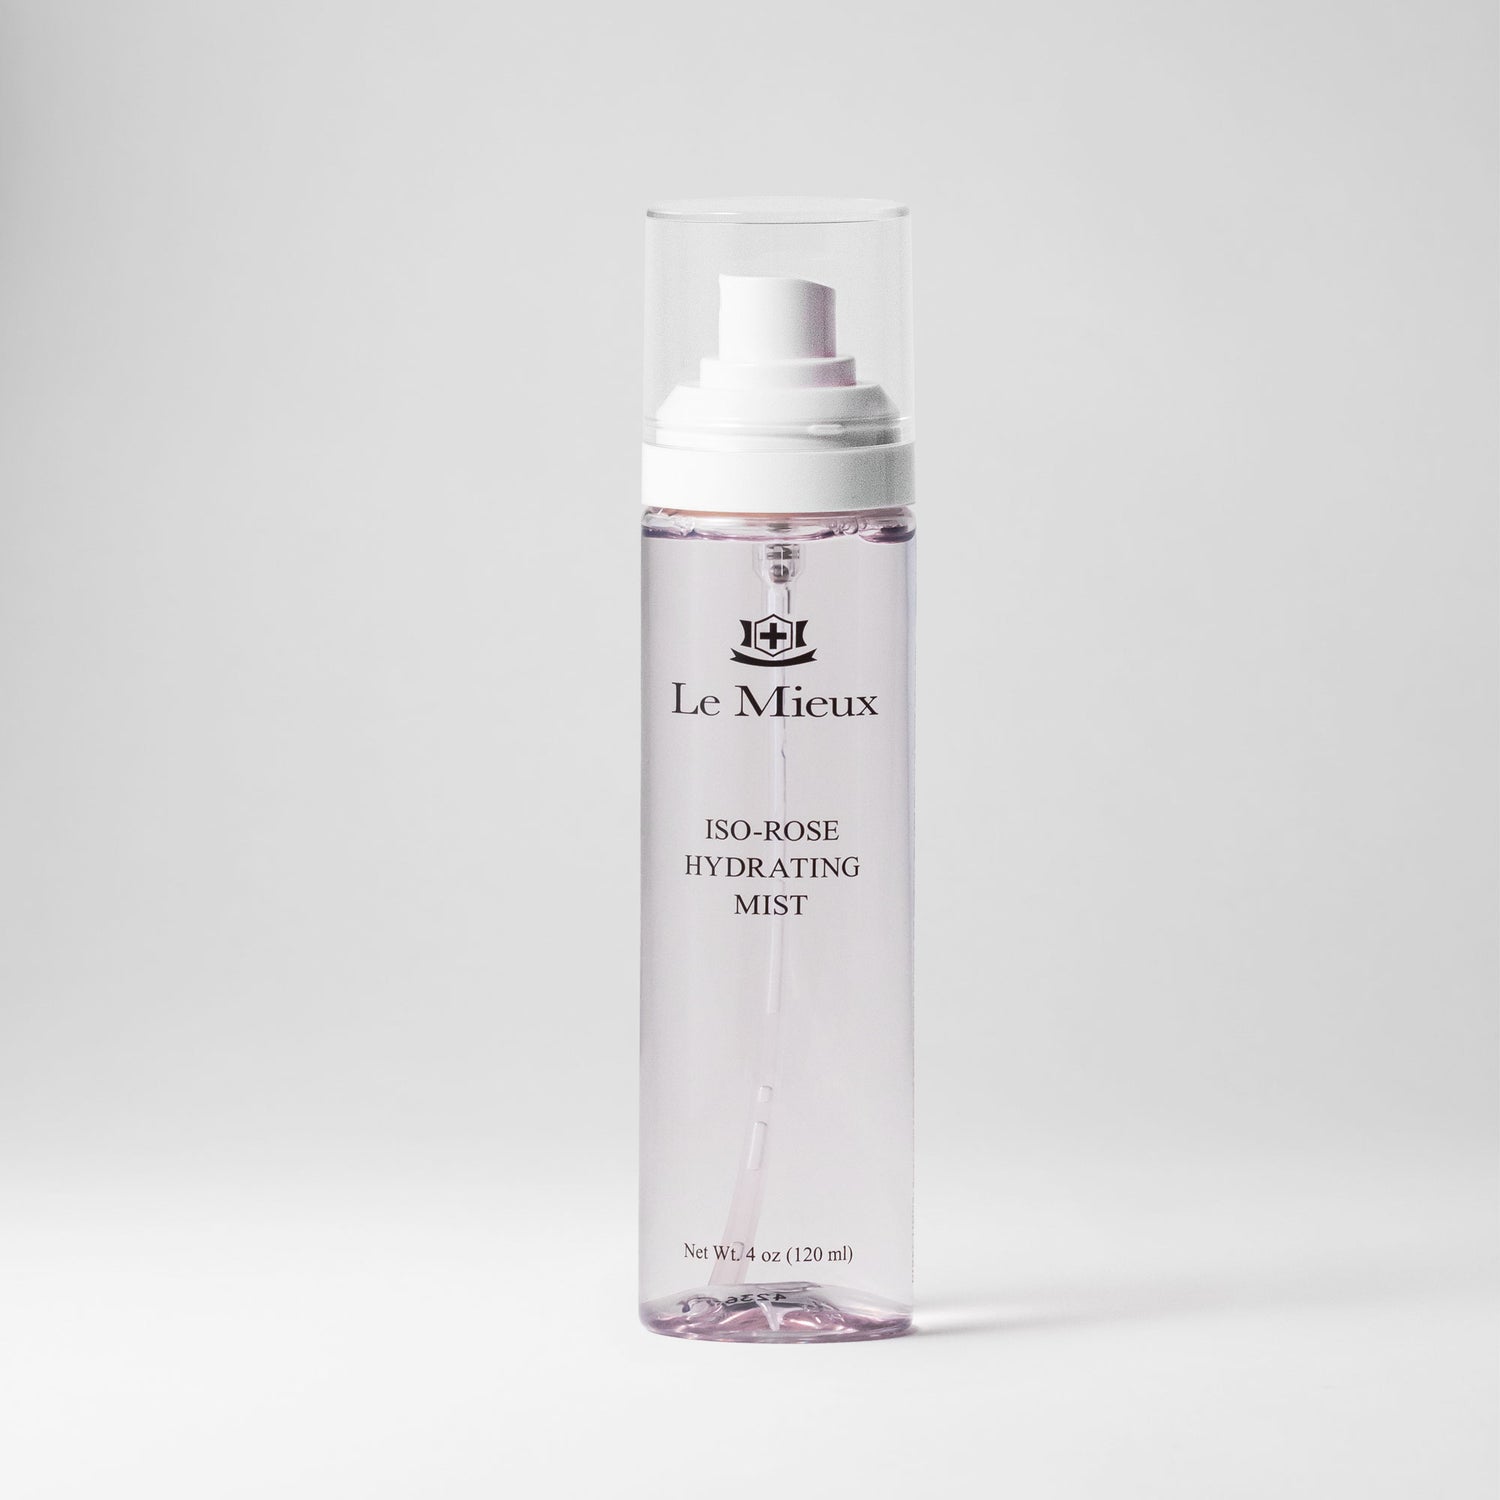  ISO-ROSE HYDRATING MIST from Le Mieux Skincare - featured